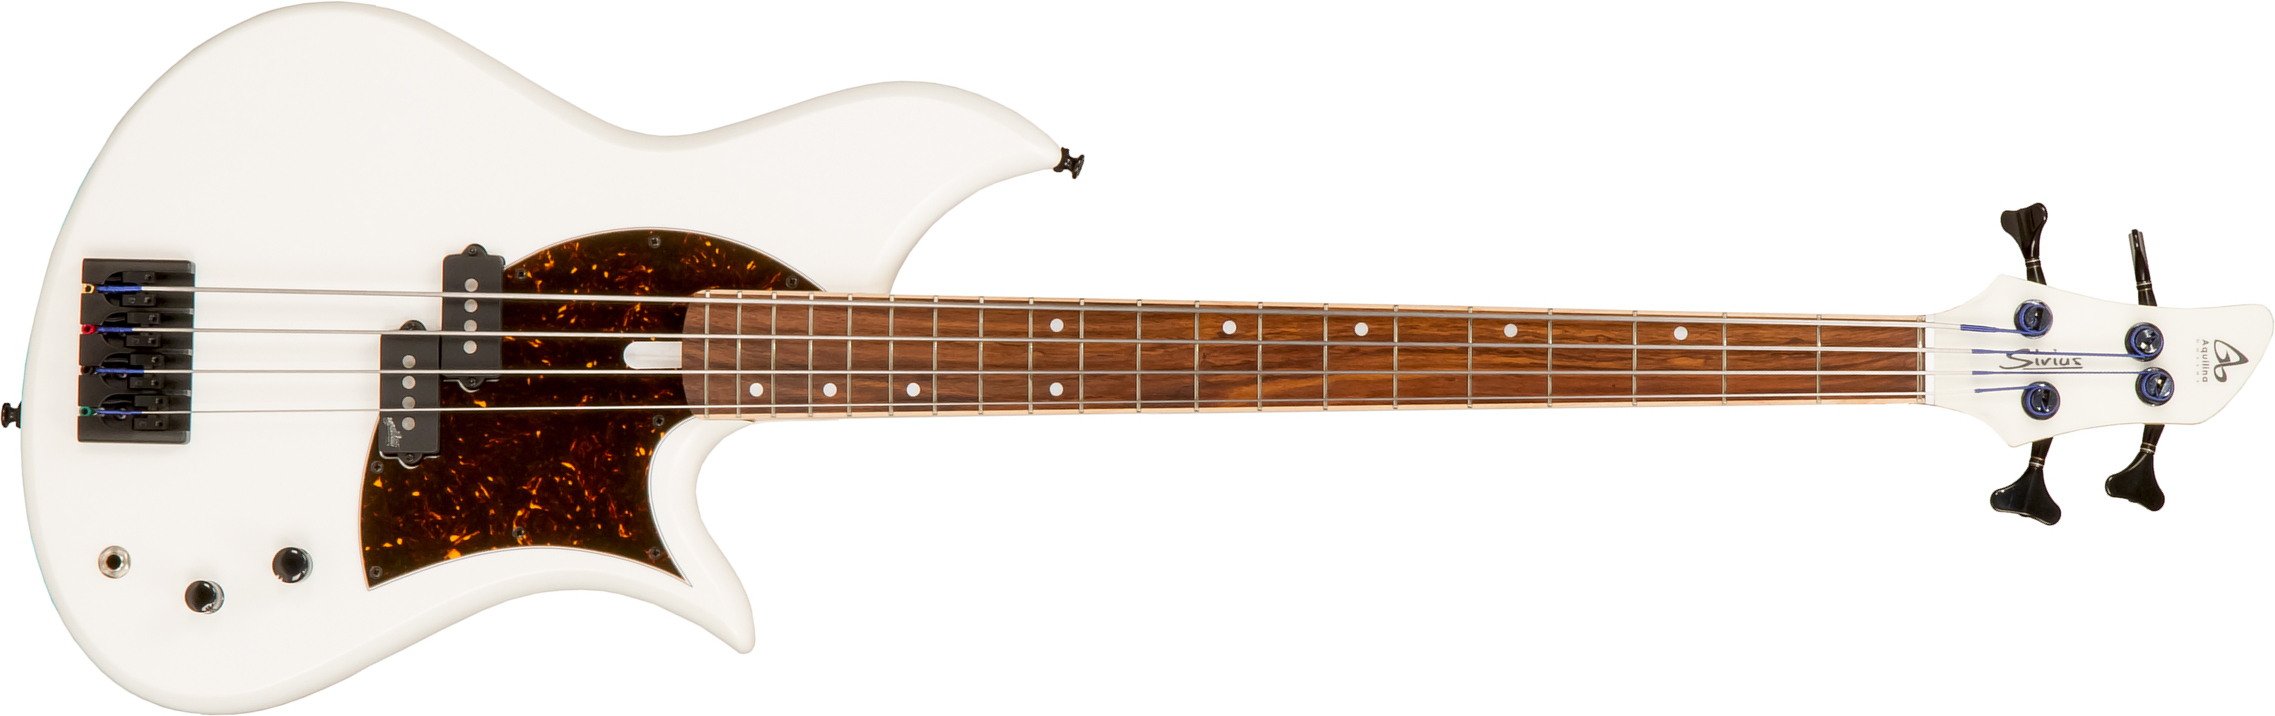 Aquilina Sirius 32 Aulne Aguilar Mn #052049 - White Satin - Solid body electric bass - Main picture